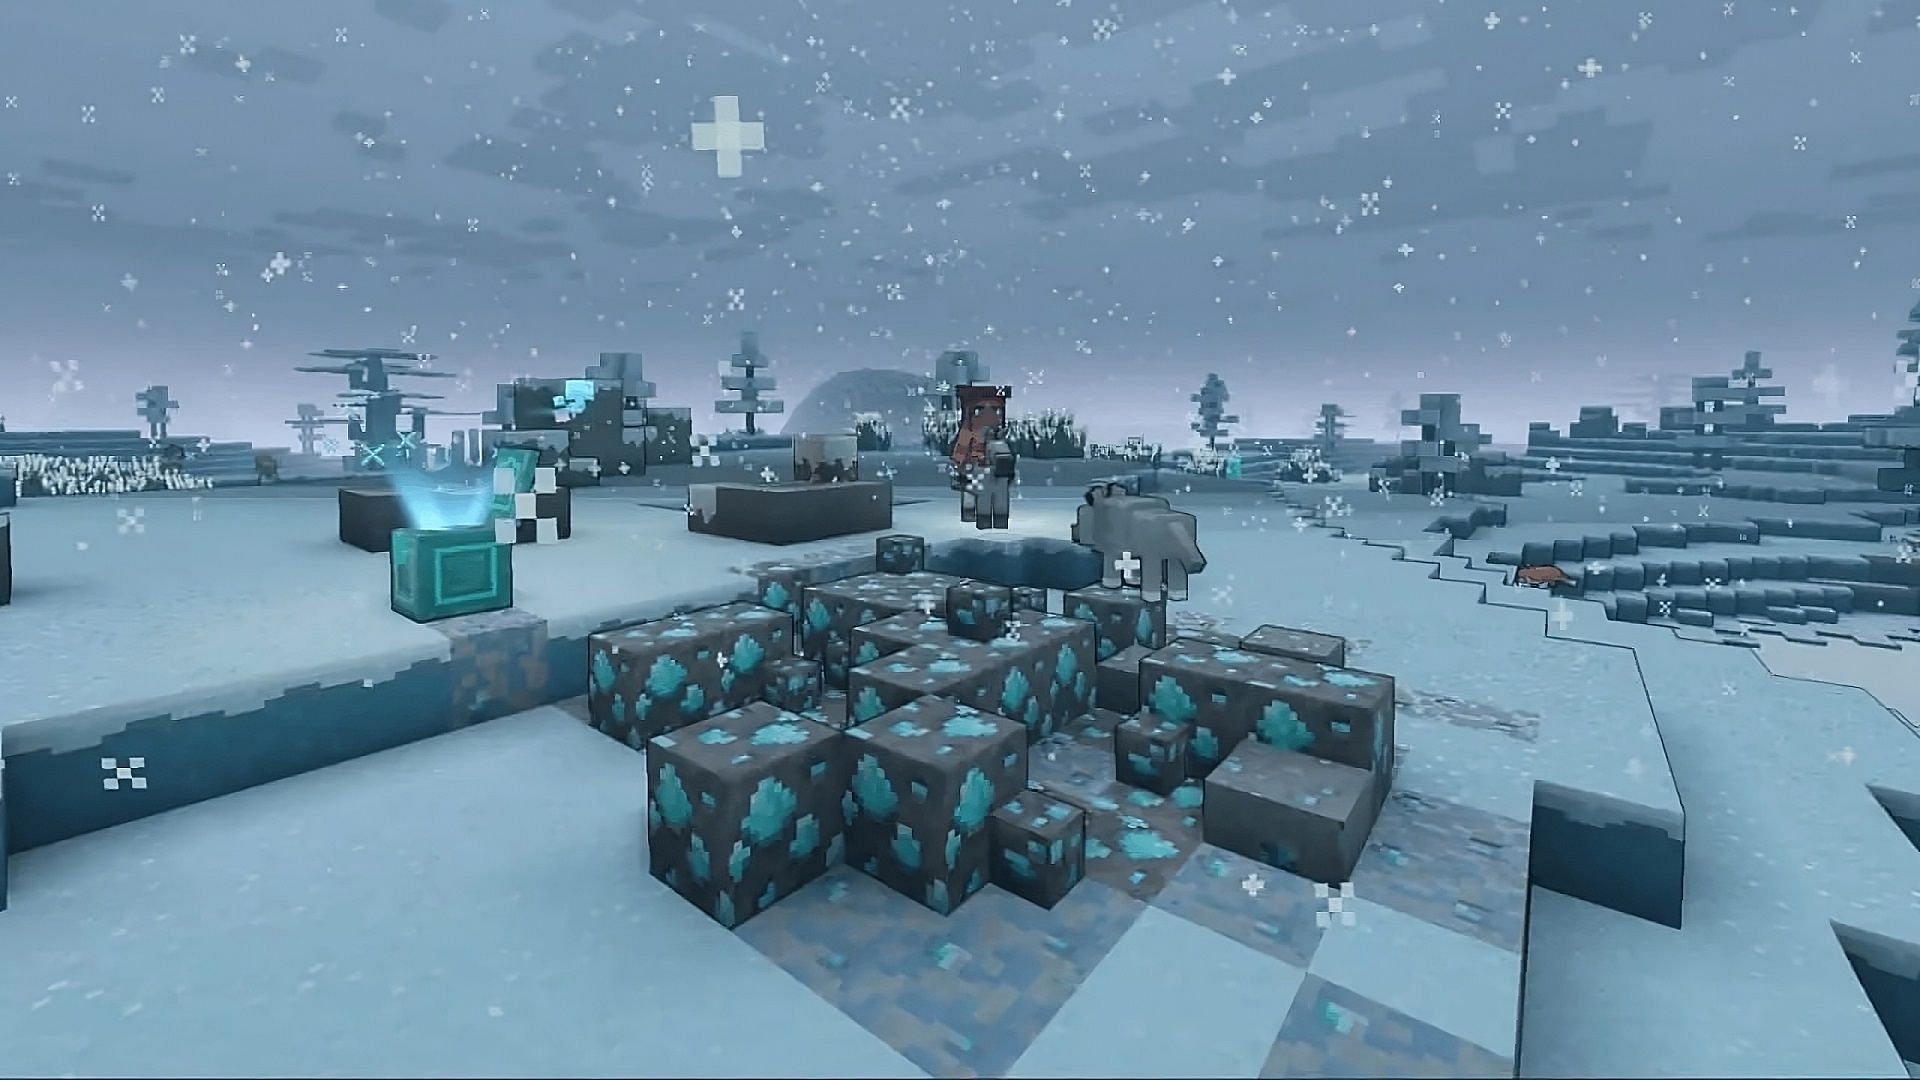 Gather Allays set out to collect diamonds from the nearby ore in Minecraft Legends (Image via Mojang)